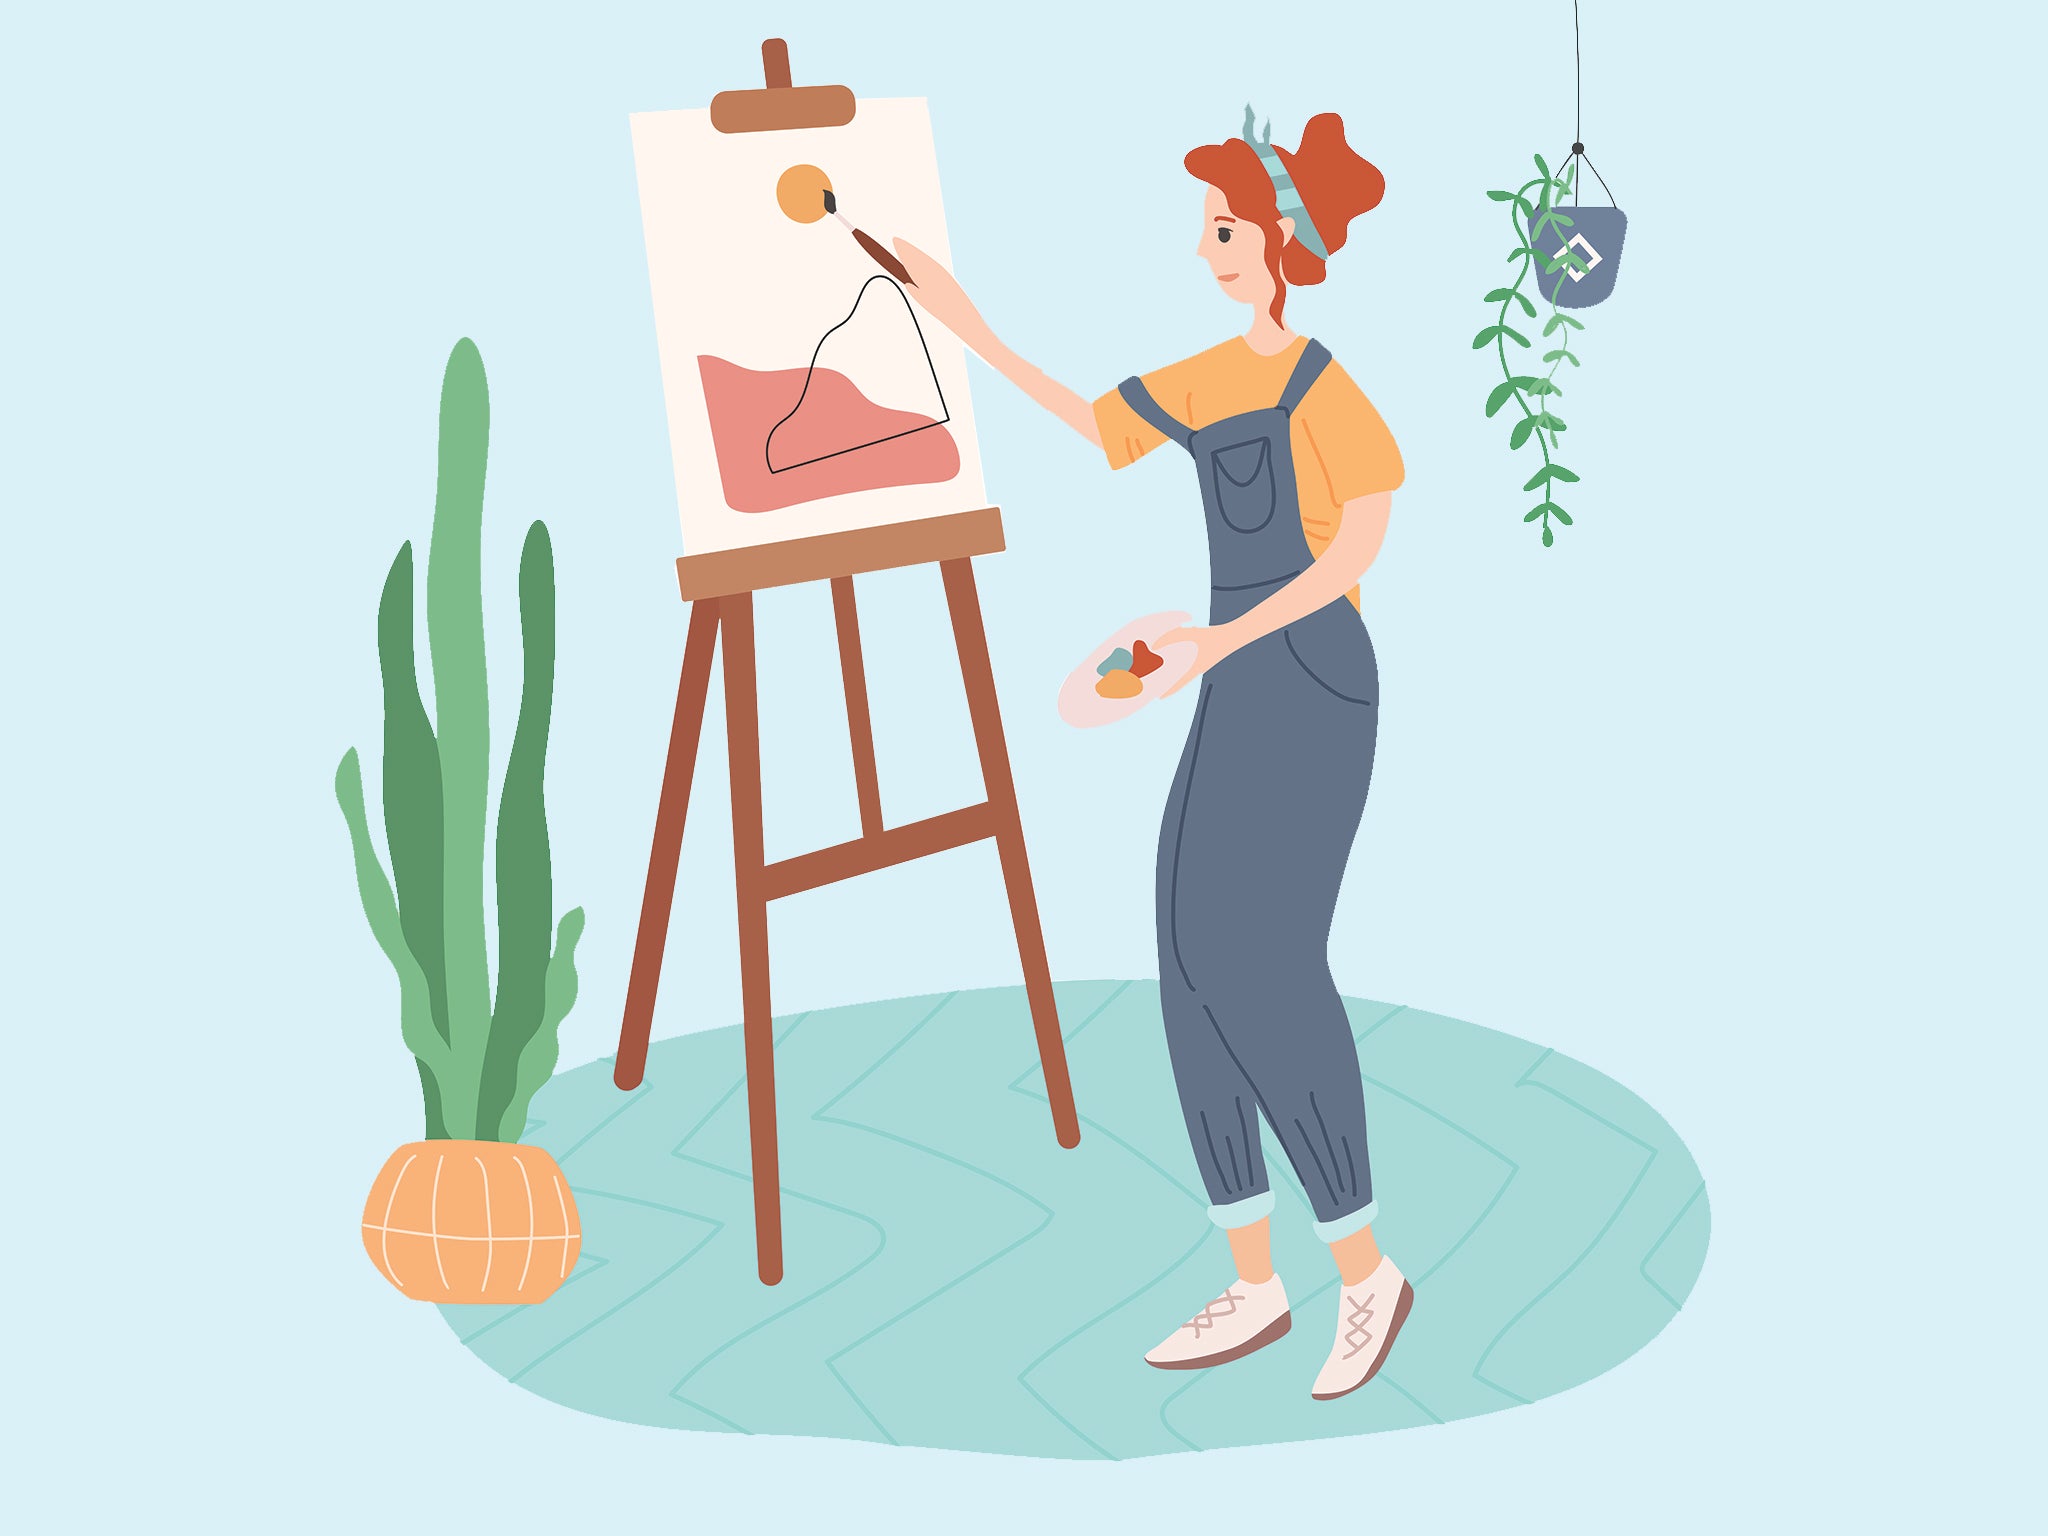 Whether it’s line drawing or acrylic painting, it’s time to get excited about your new hobby